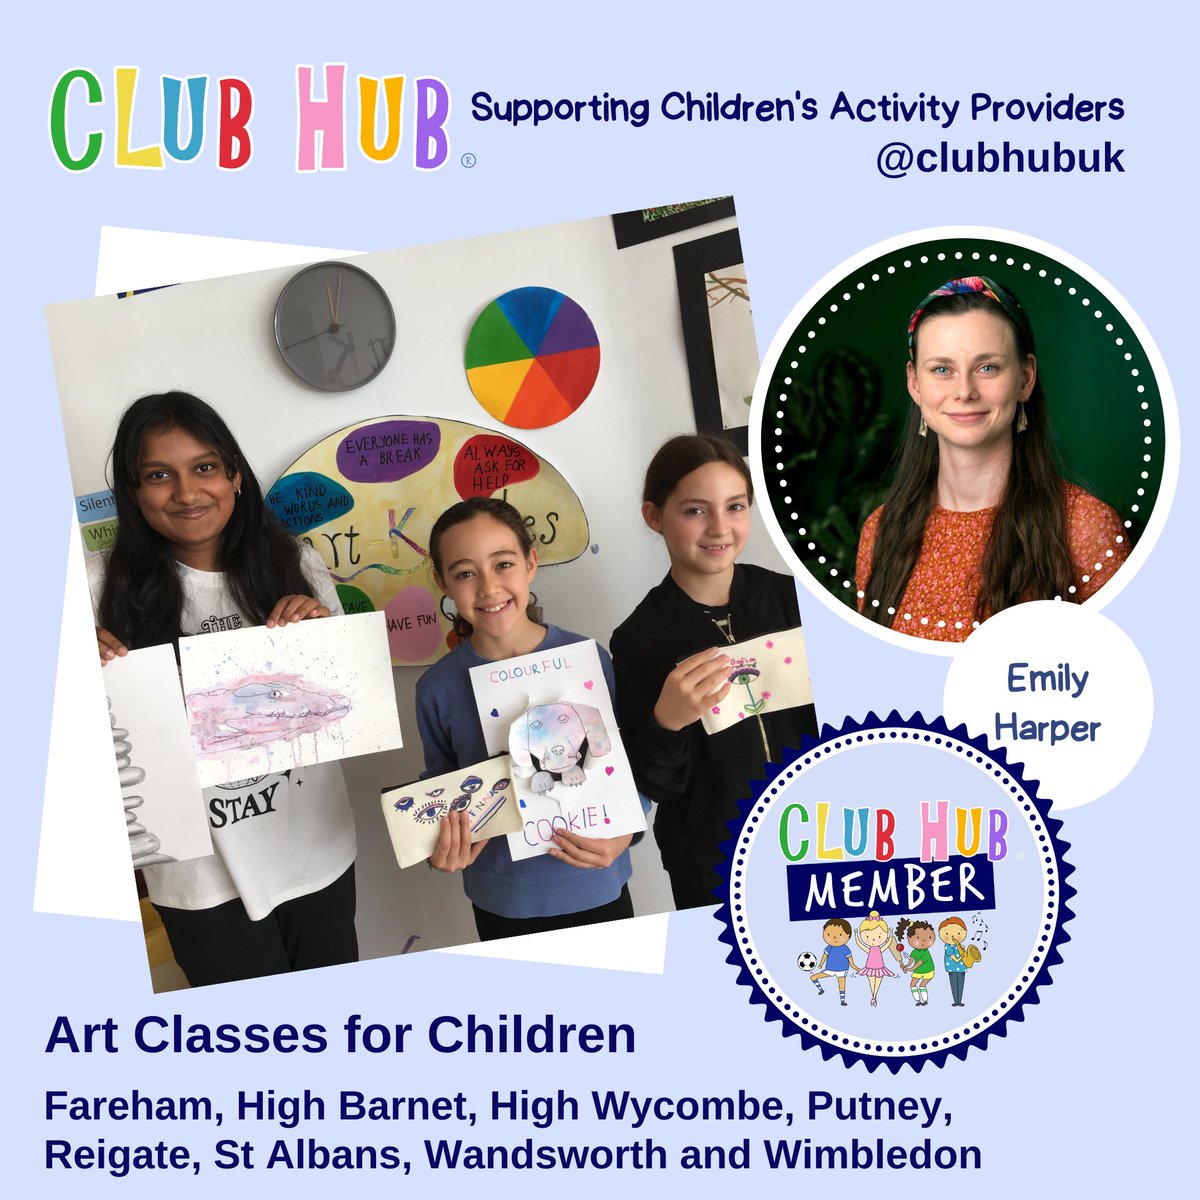 Are you looking for Art Classes for your Child?

Do you live in or near Fareham, High Barnet, High Wycombe, Putney, Reigate, St Albans, Wandsworth or Wimledon?

Check out @artKclub

Book Now! - clubhubuk.co.uk/?s=Art-K

#ClubHubMember #ArtK